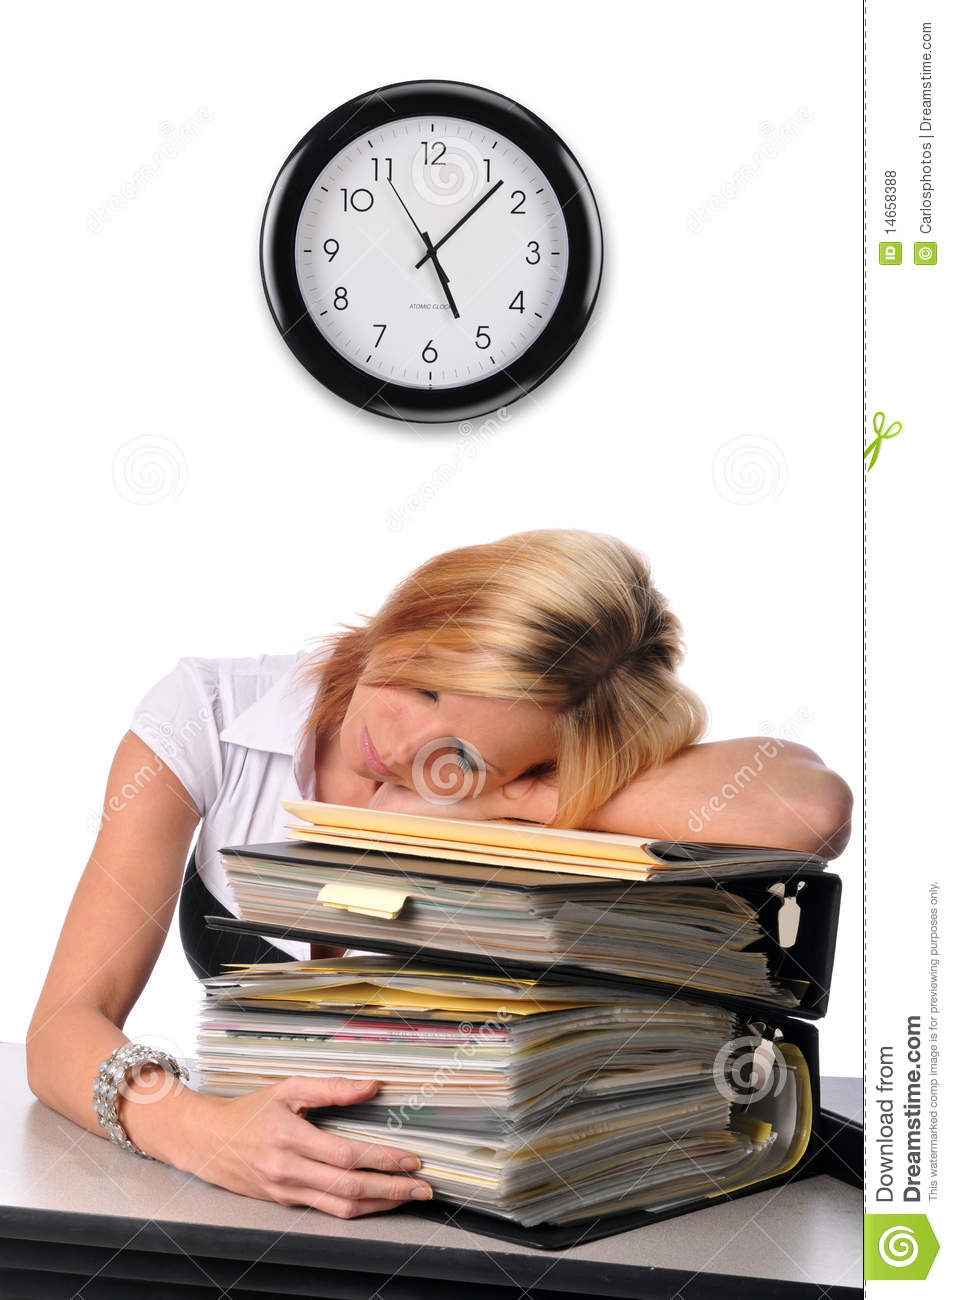 Woman Sleeping Over A Pile Of Files Royalty Free Stock Photos   Image    